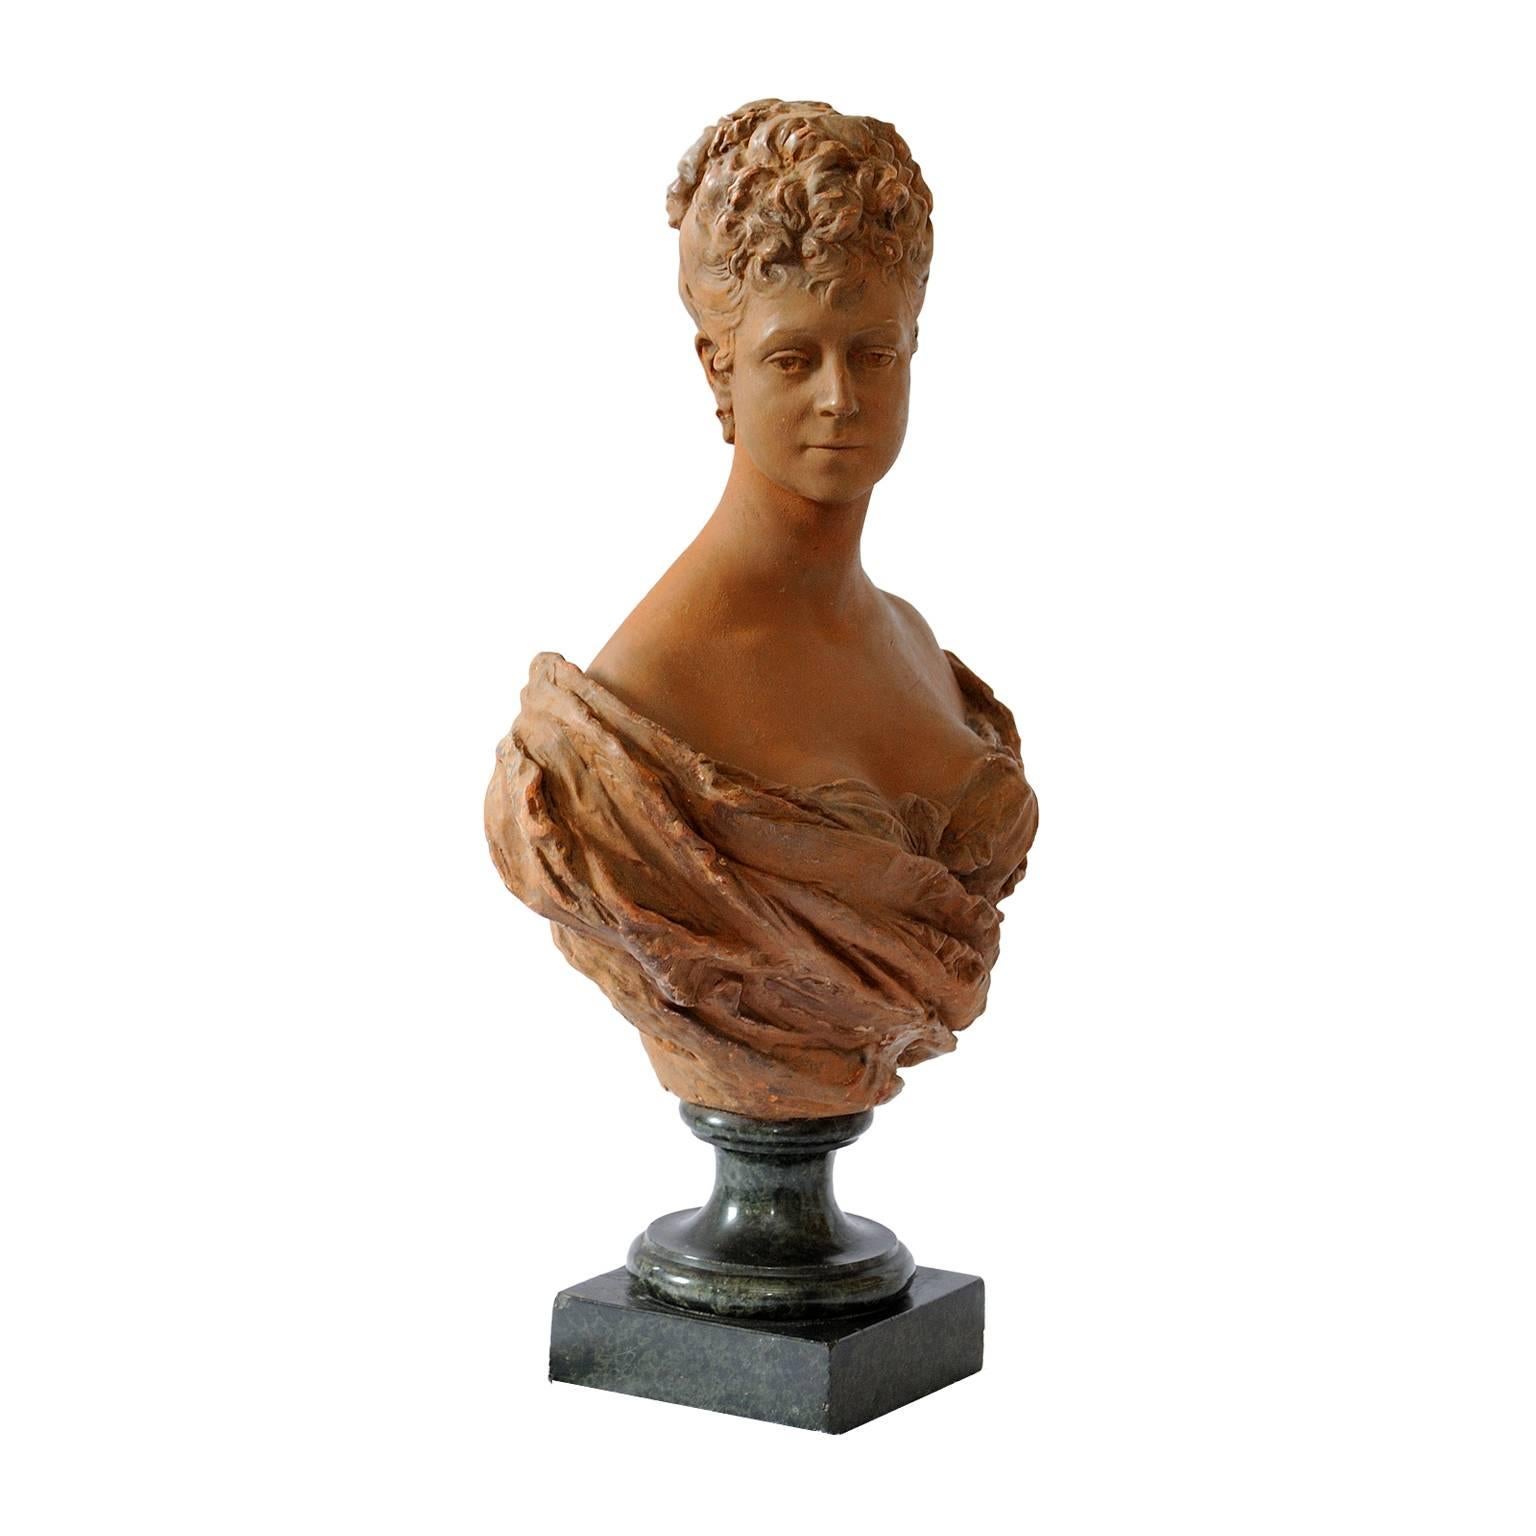 This is a rather beautiful French mid-19th century terracotta bust of a young 18th century noble woman standing on a green marble base, circa 1860.